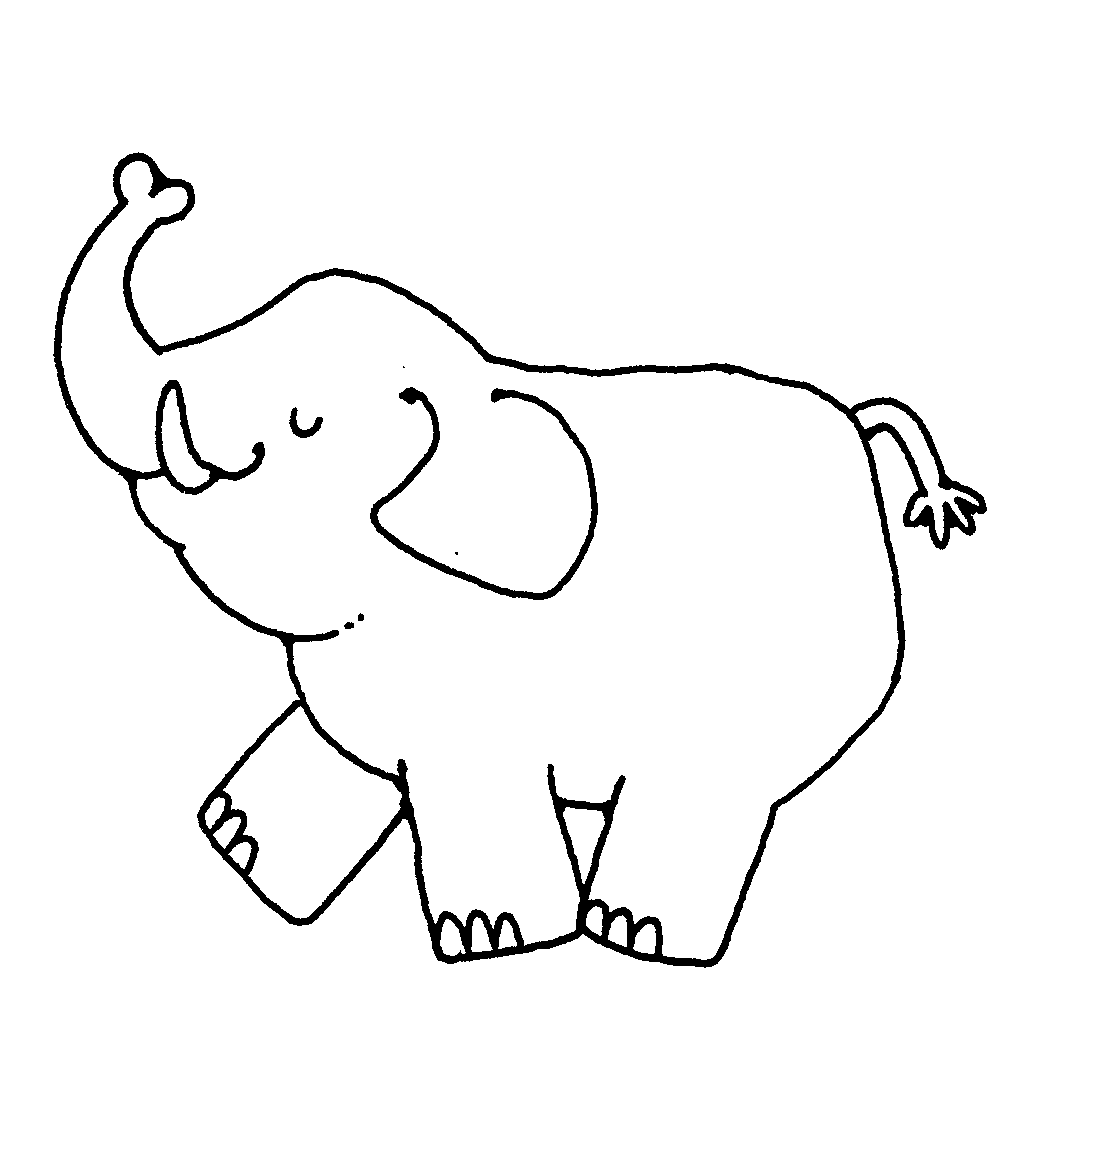 Elephant Clip Art Black And White Images & Pictures - Becuo